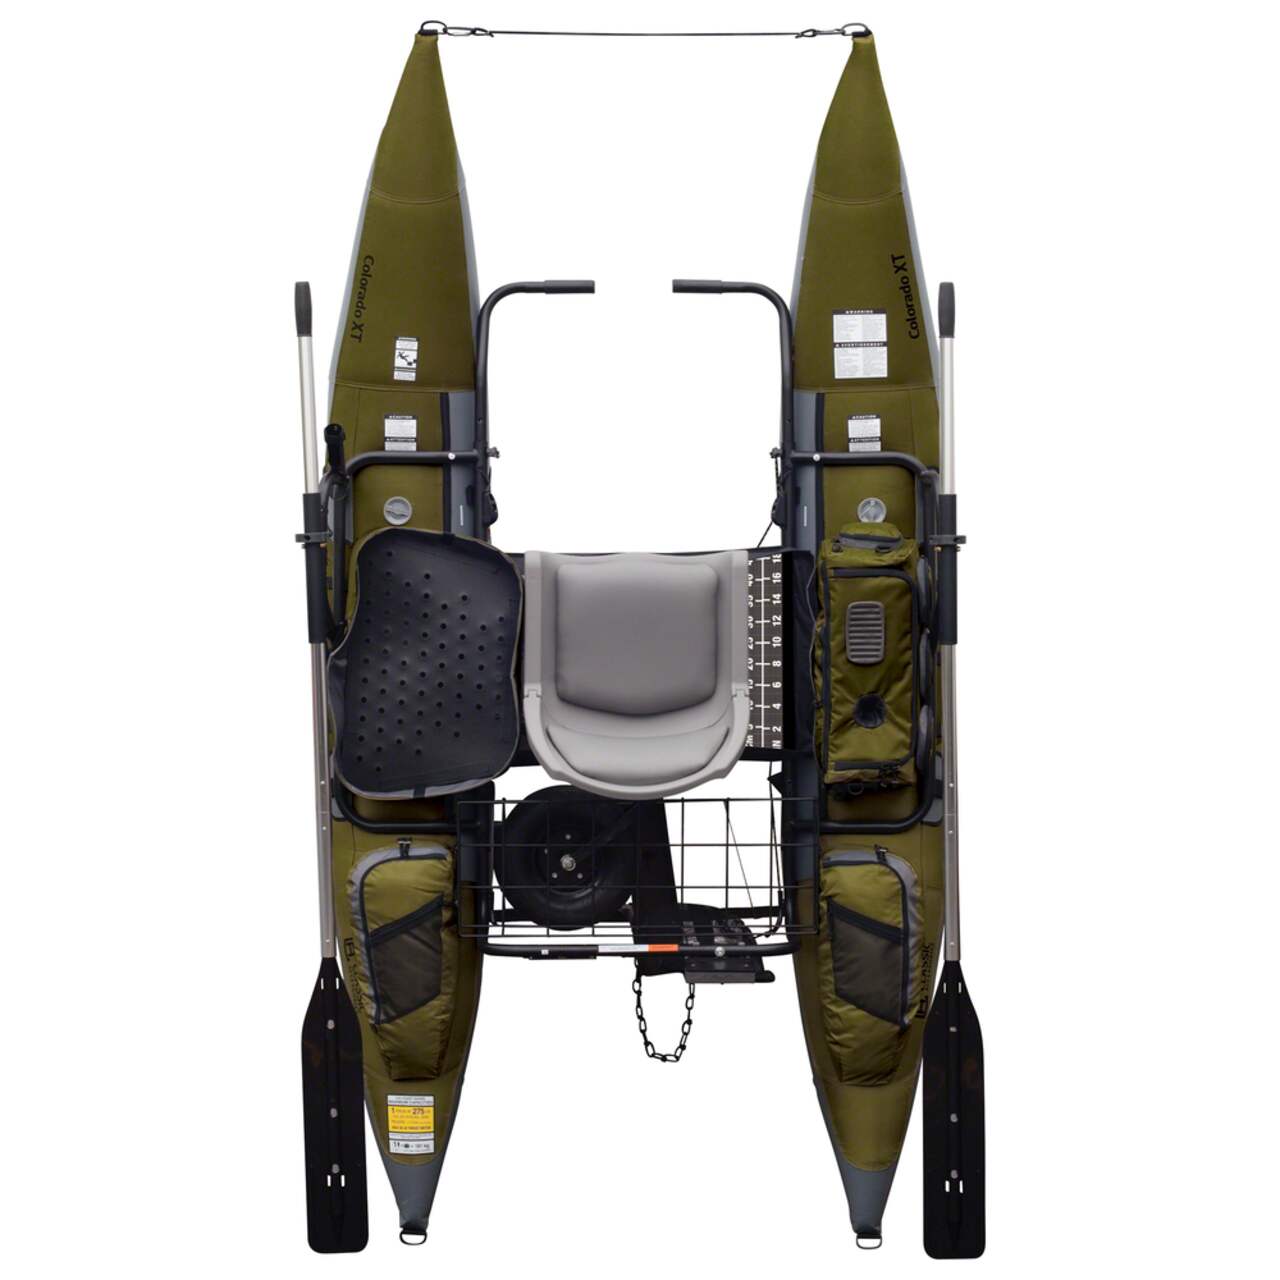 Colorado XT 1-Person Inflatable Fishing Pontoon Boat with Aluminum Oars &  Transport Wheel